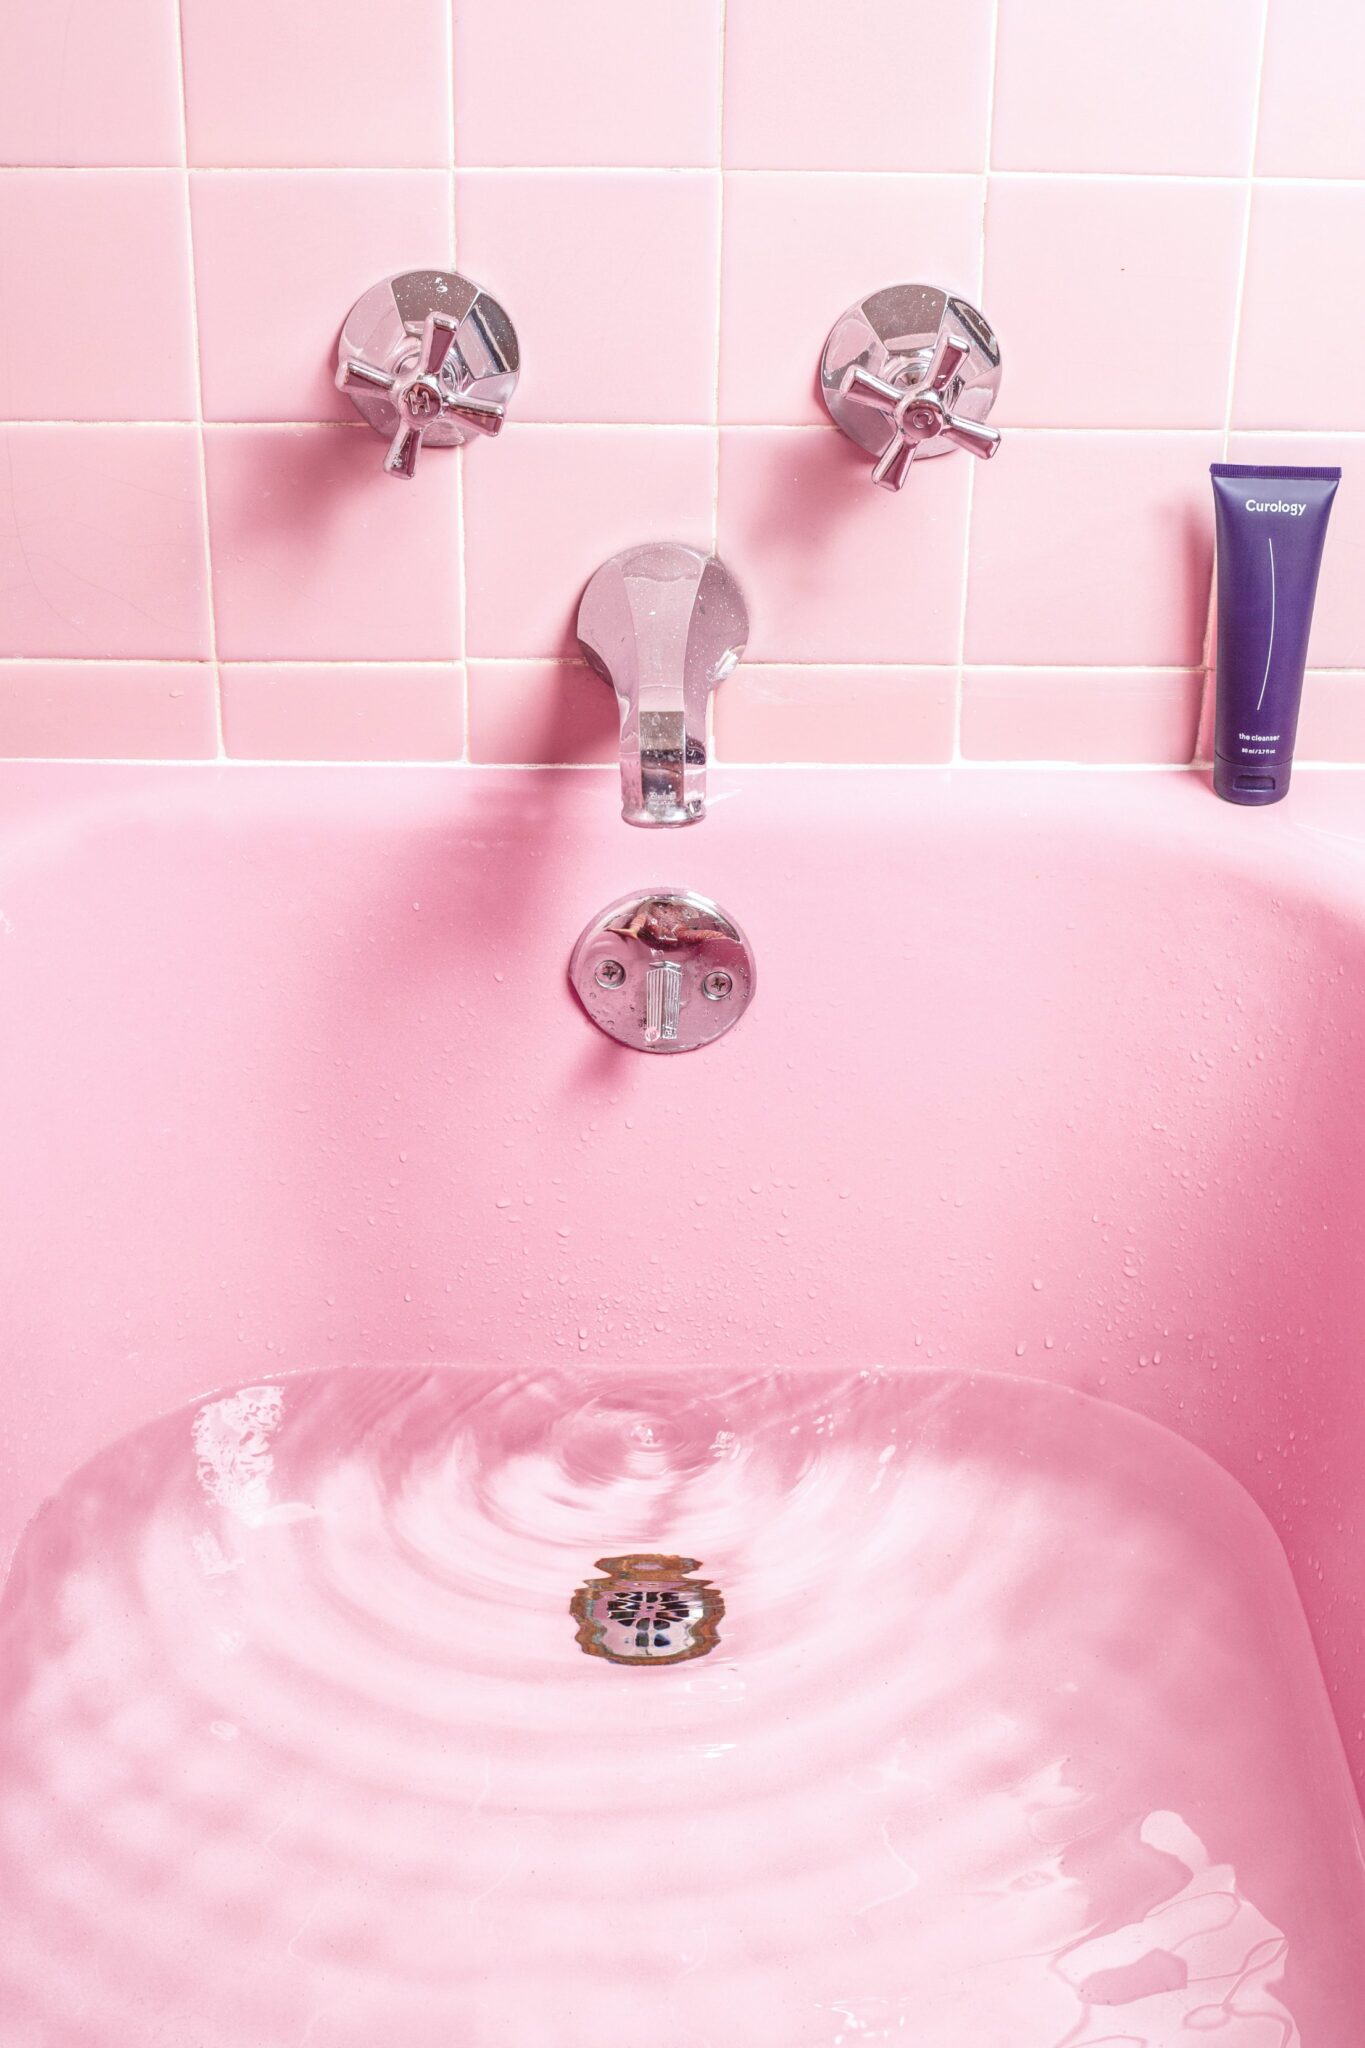 A pastel pink bathroom filled up a quarter. There are pink tiles too.